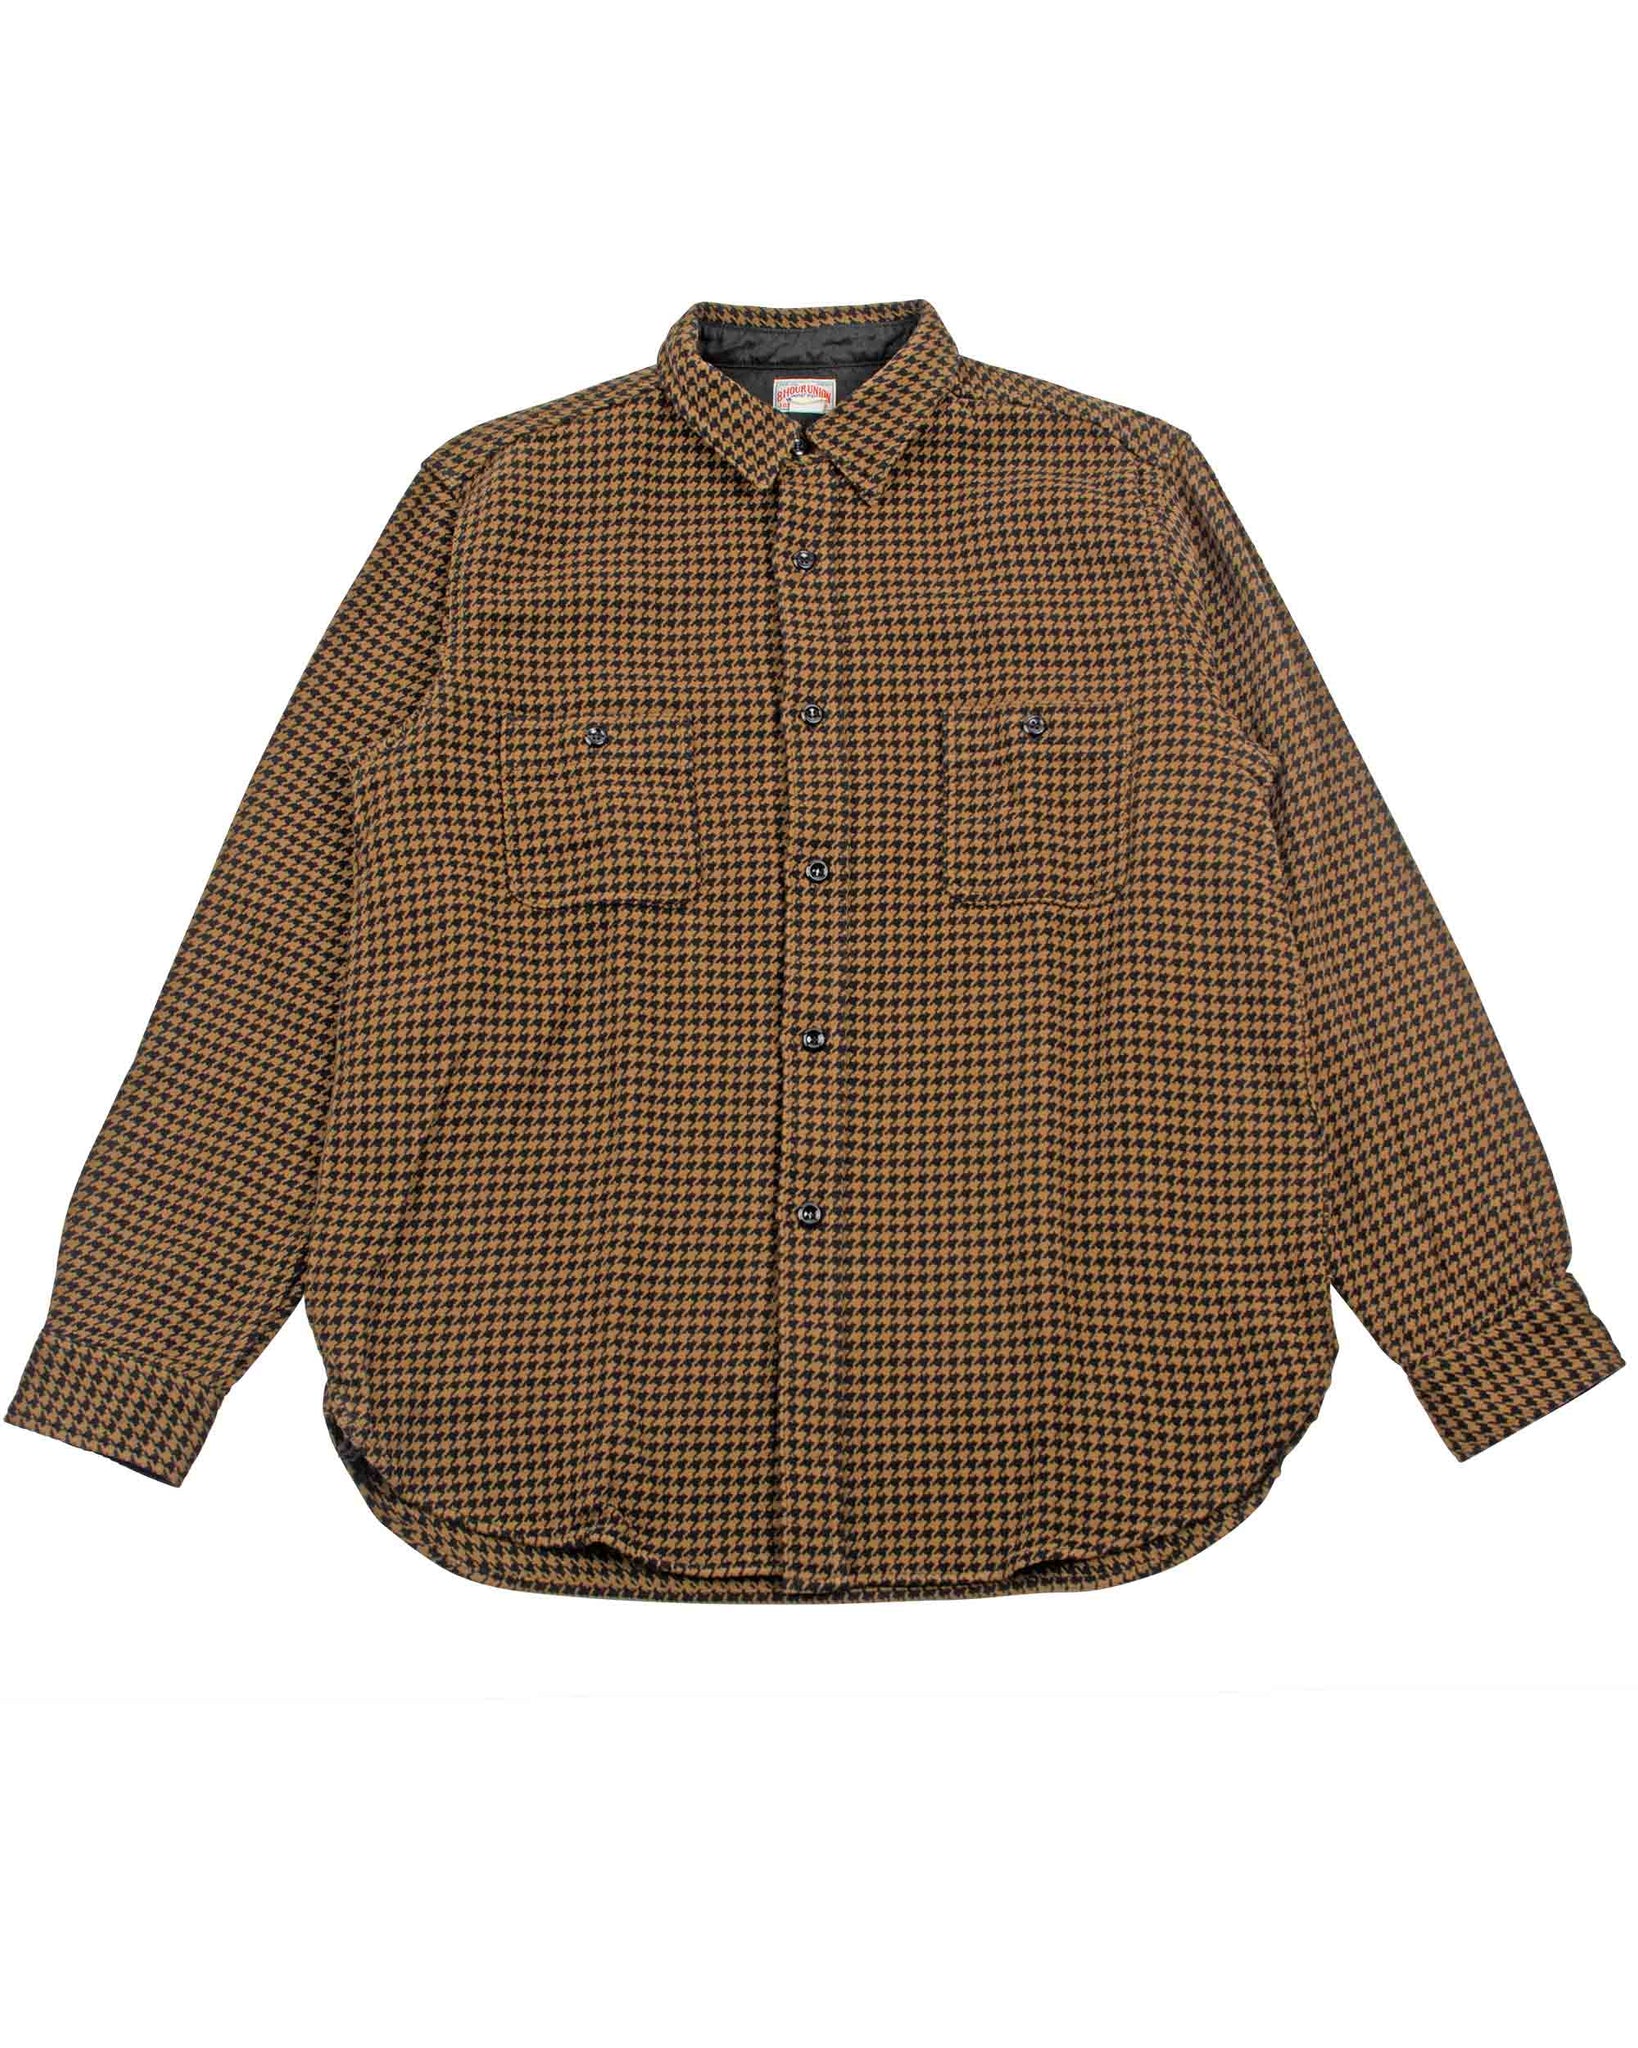 The Real McCoy's MS21102 8HU Houndstooth Flannel Shirt Mustard